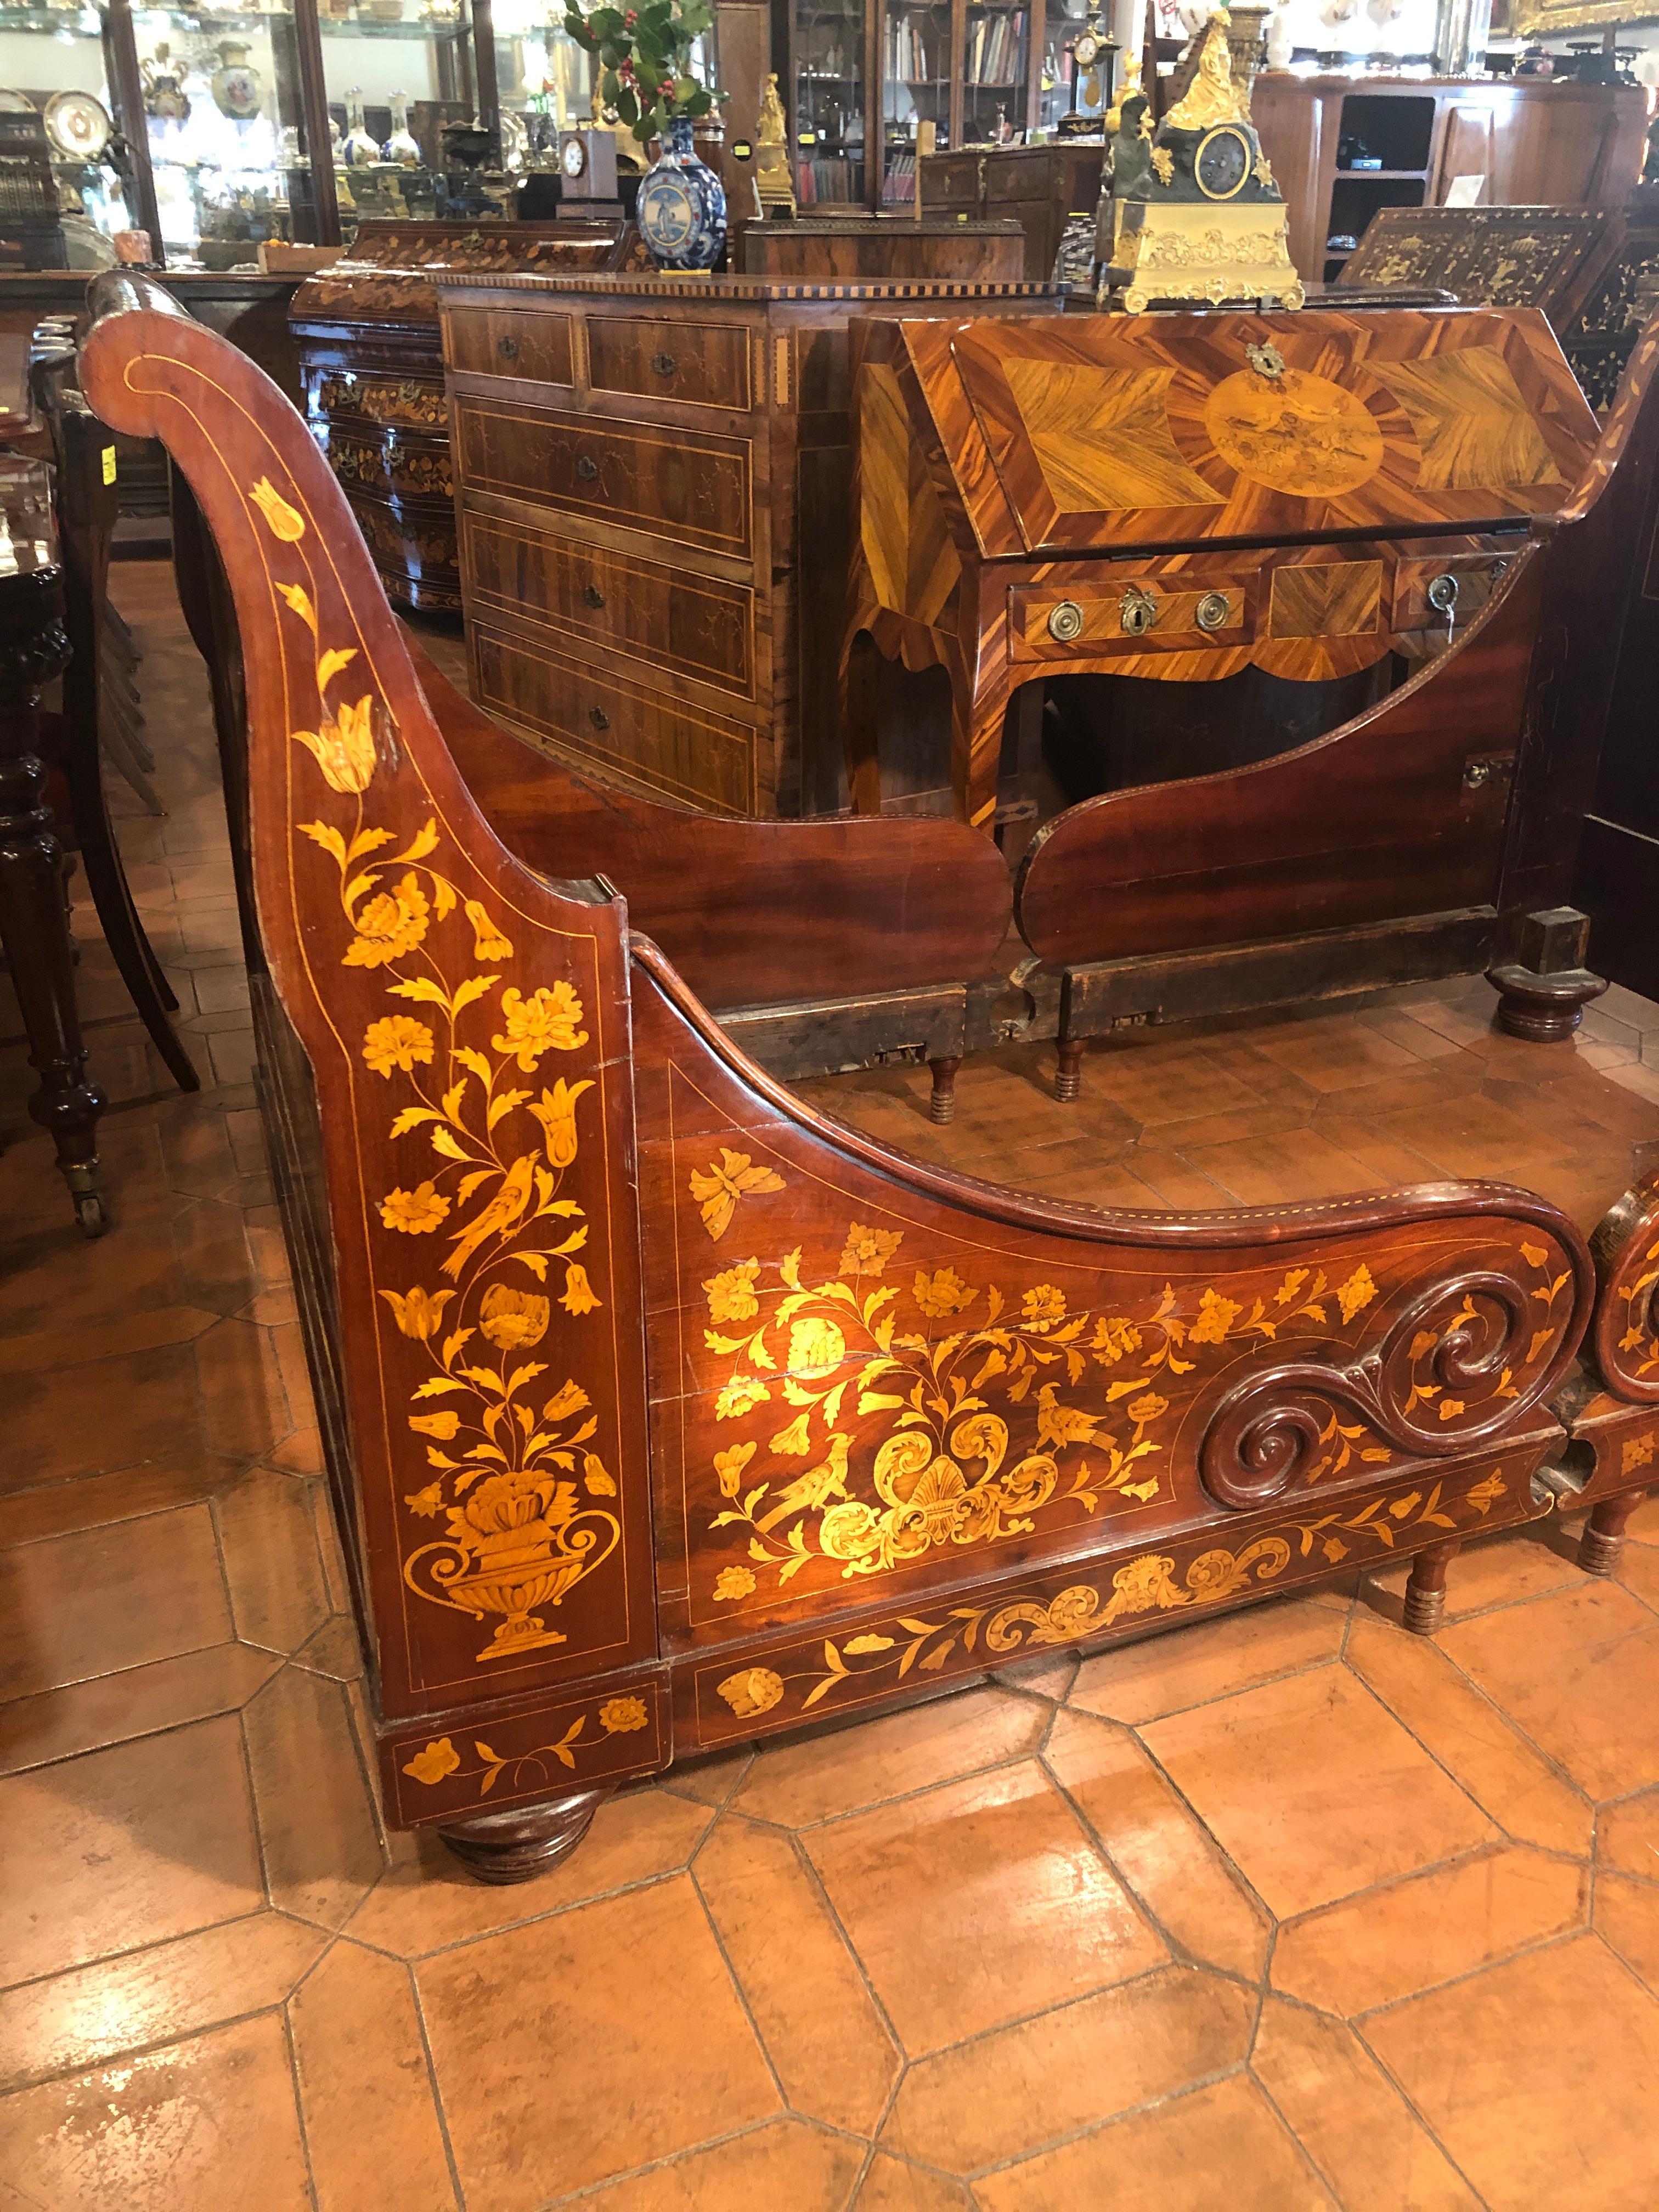 Fantastic center bed, completely inlaid on all the surfaces available to the eye. Dutch bed for the French market, from where it takes the forms, inlaid in the Classic Dutch technique. In mahogany wood and boxwood inlays to give a noticeable